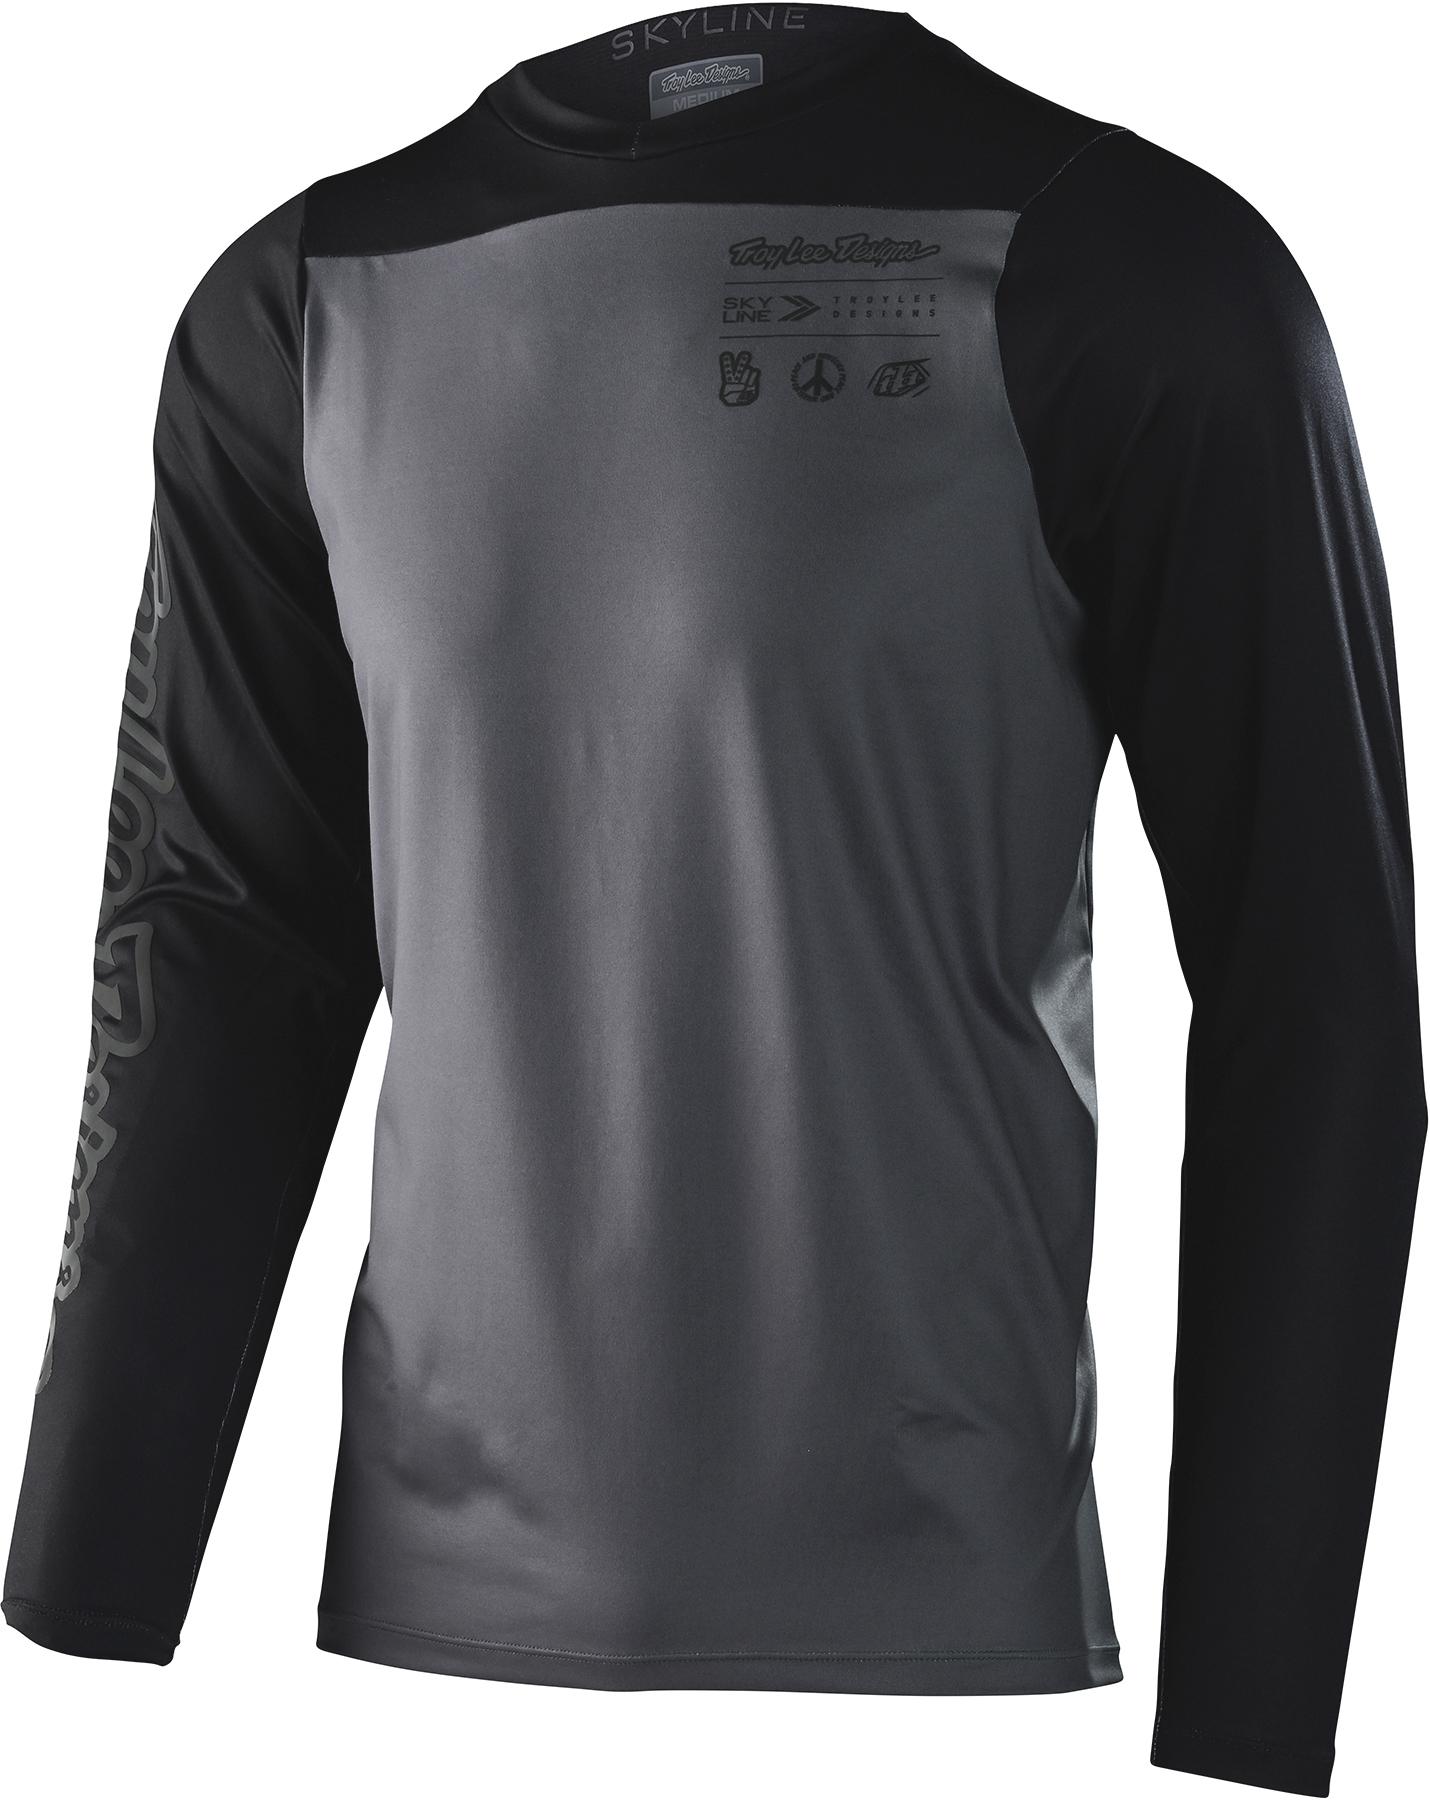 Troy Lee Designs Skyline Chill Cycling Jersey - Charcoal